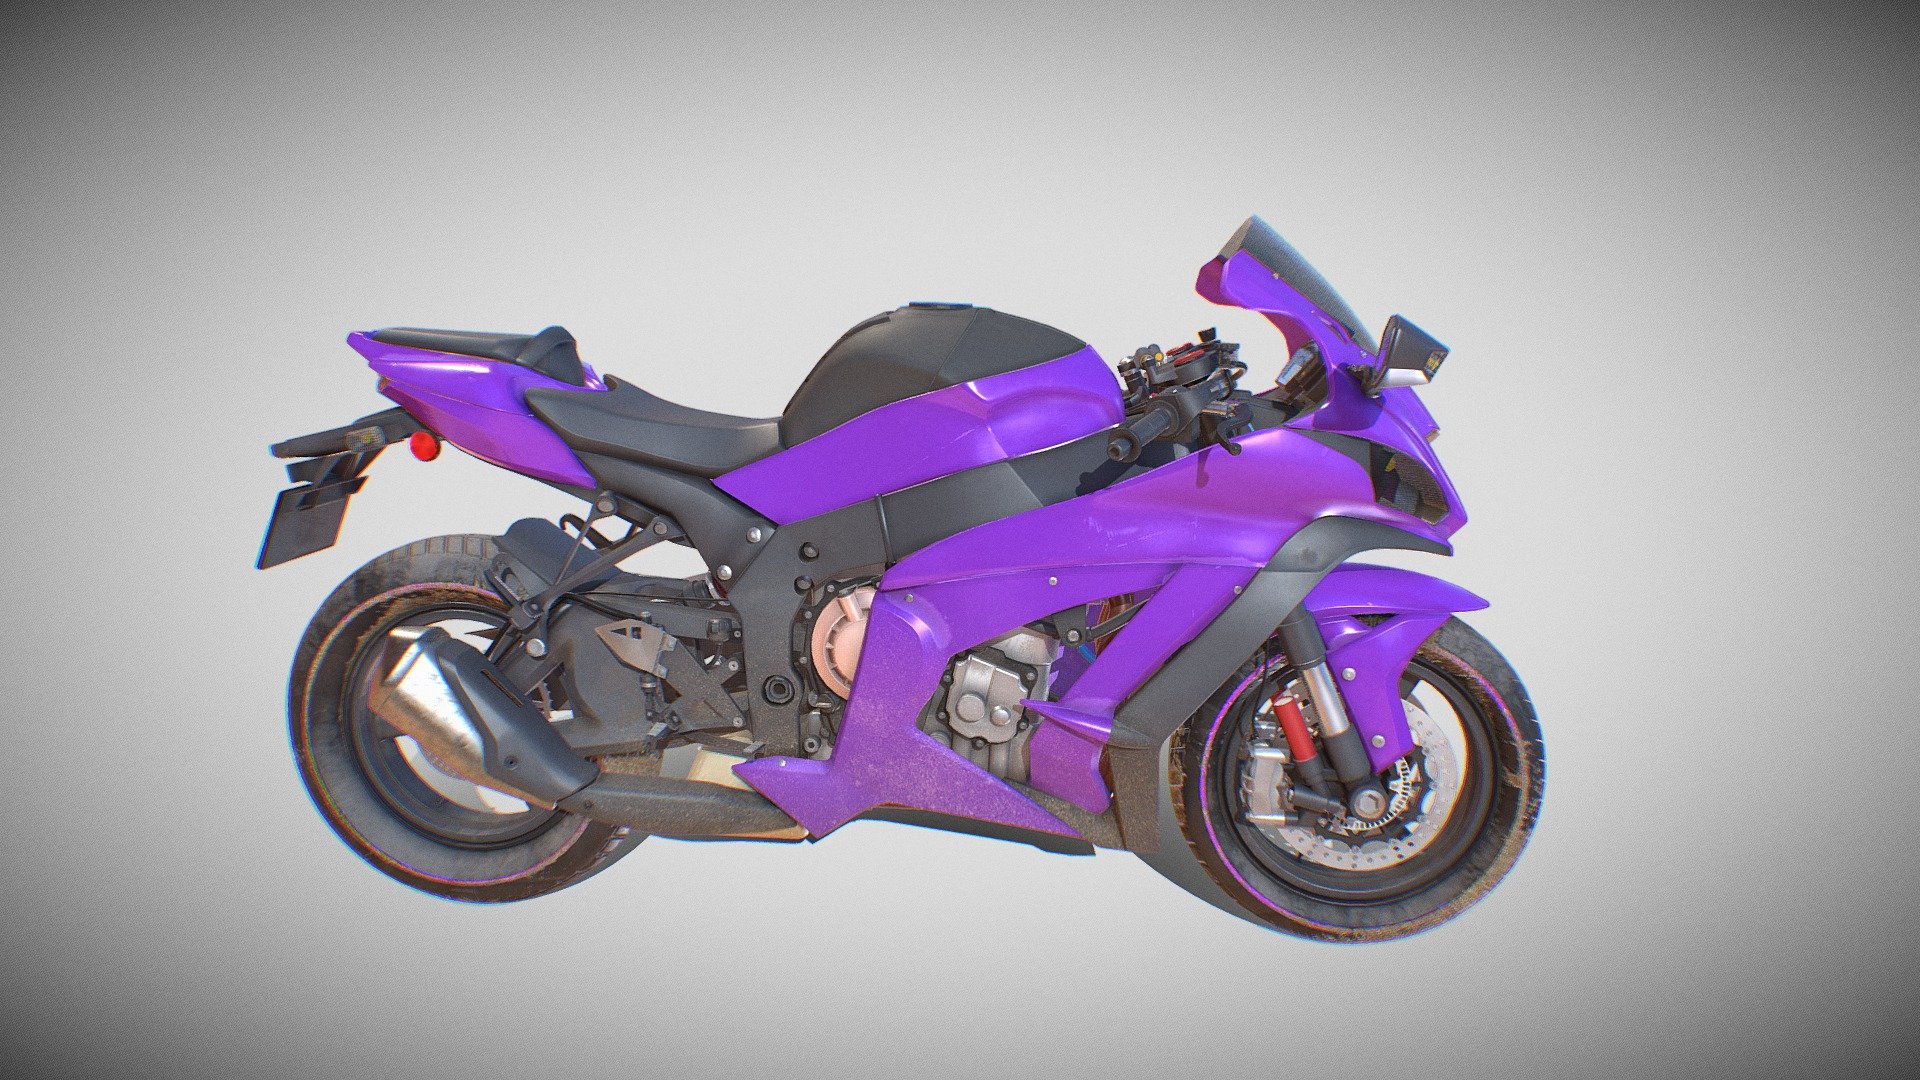 I made a kawasaki ZX-10R model in high poly for my portfolio lot of time was spend on this - Kawasaki ZX-10R - 3D model by youdhistir 3d model